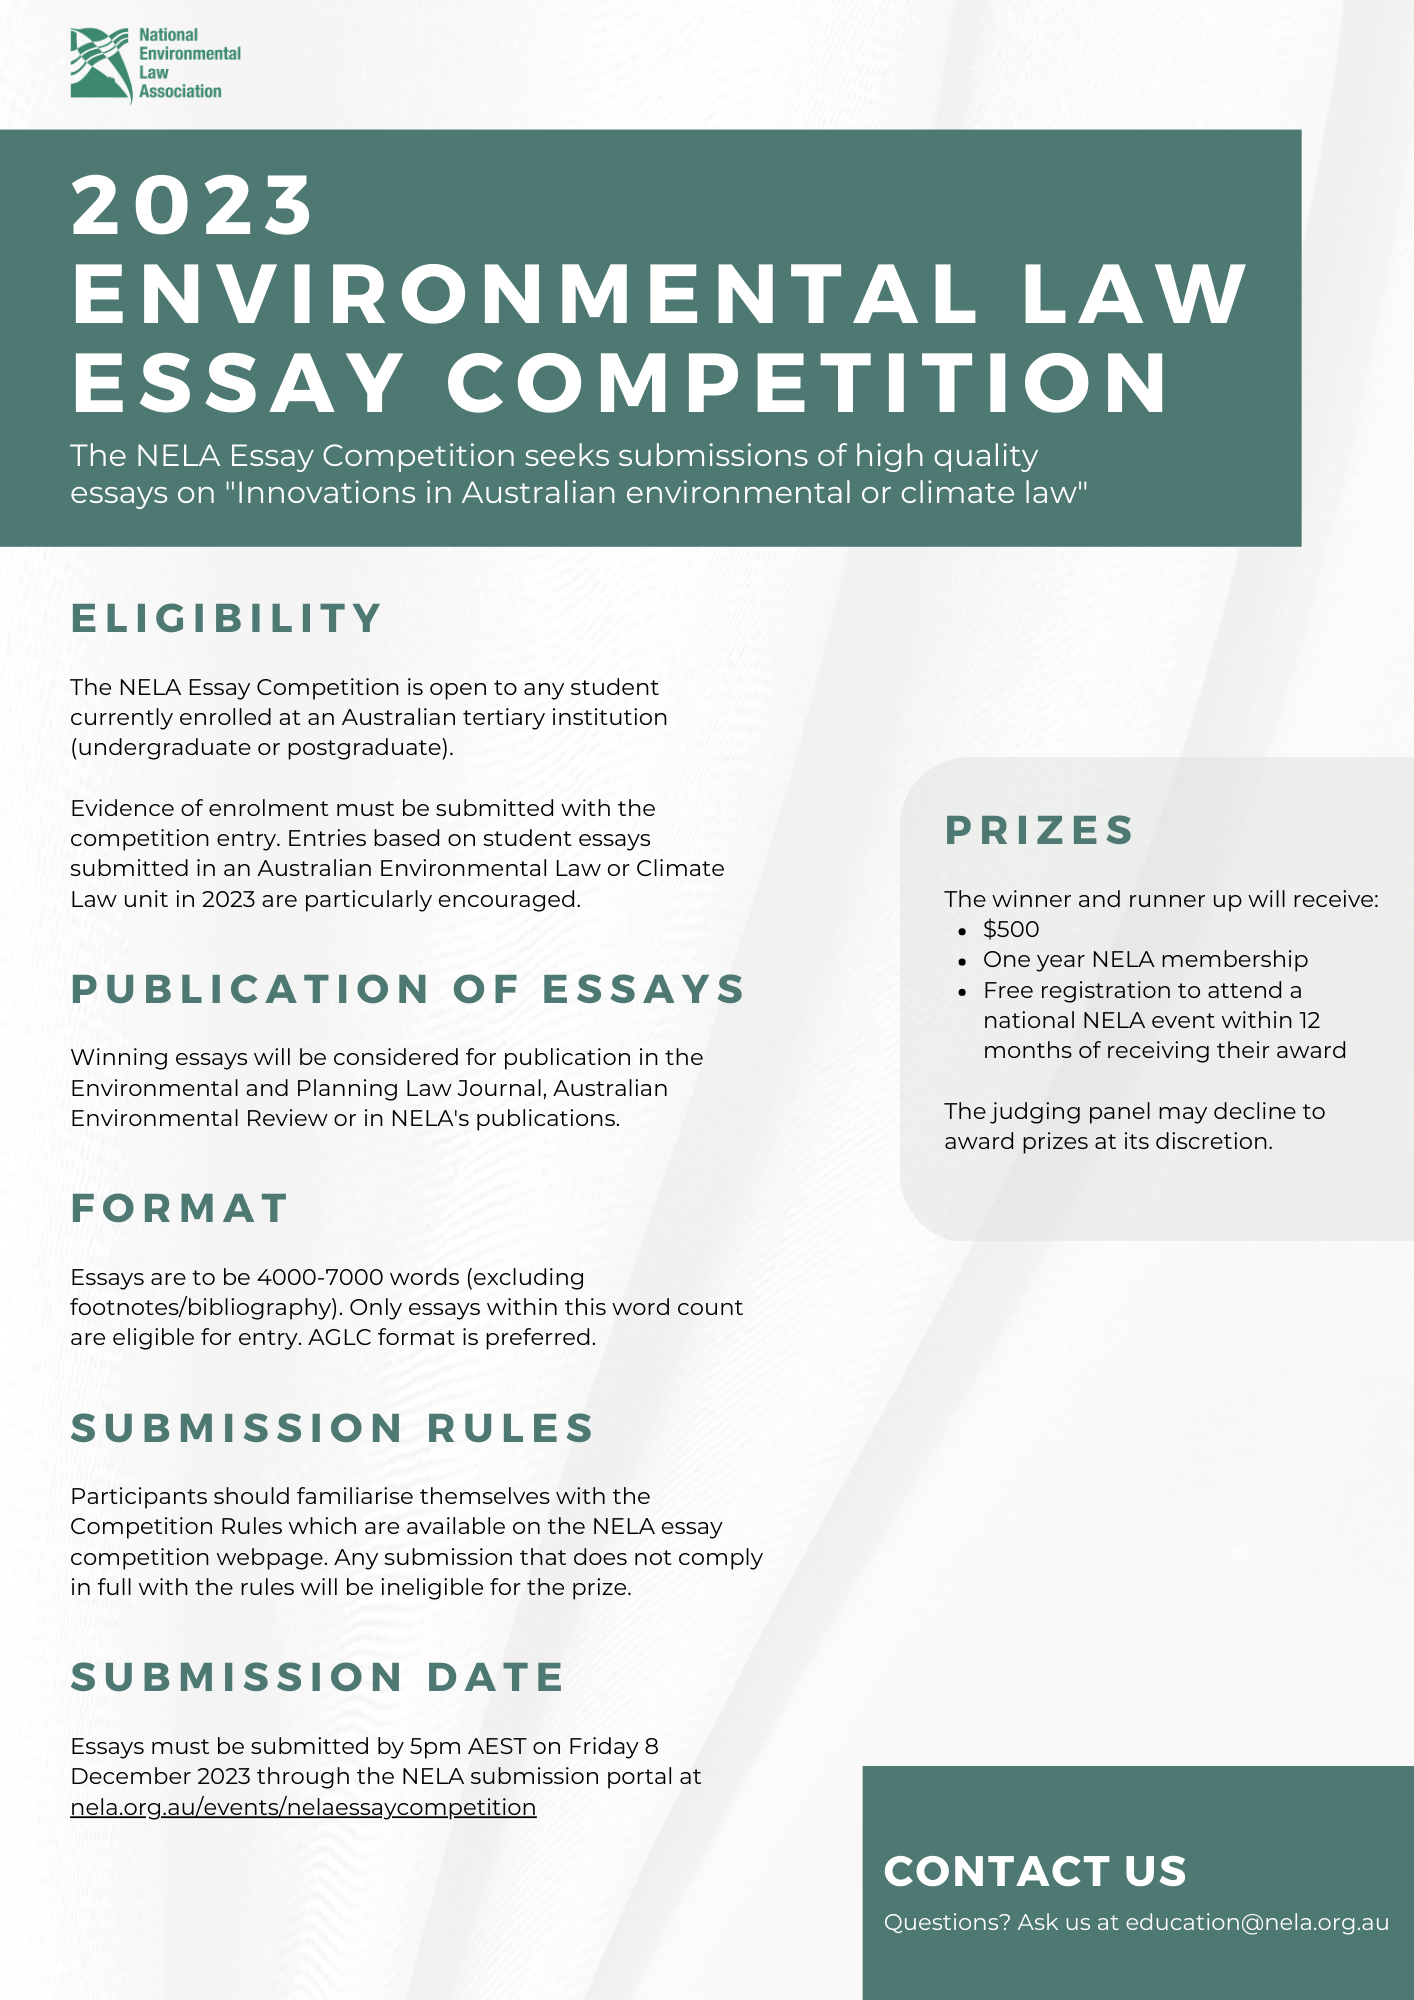 2023 Environmental Law Essay Competition (1)